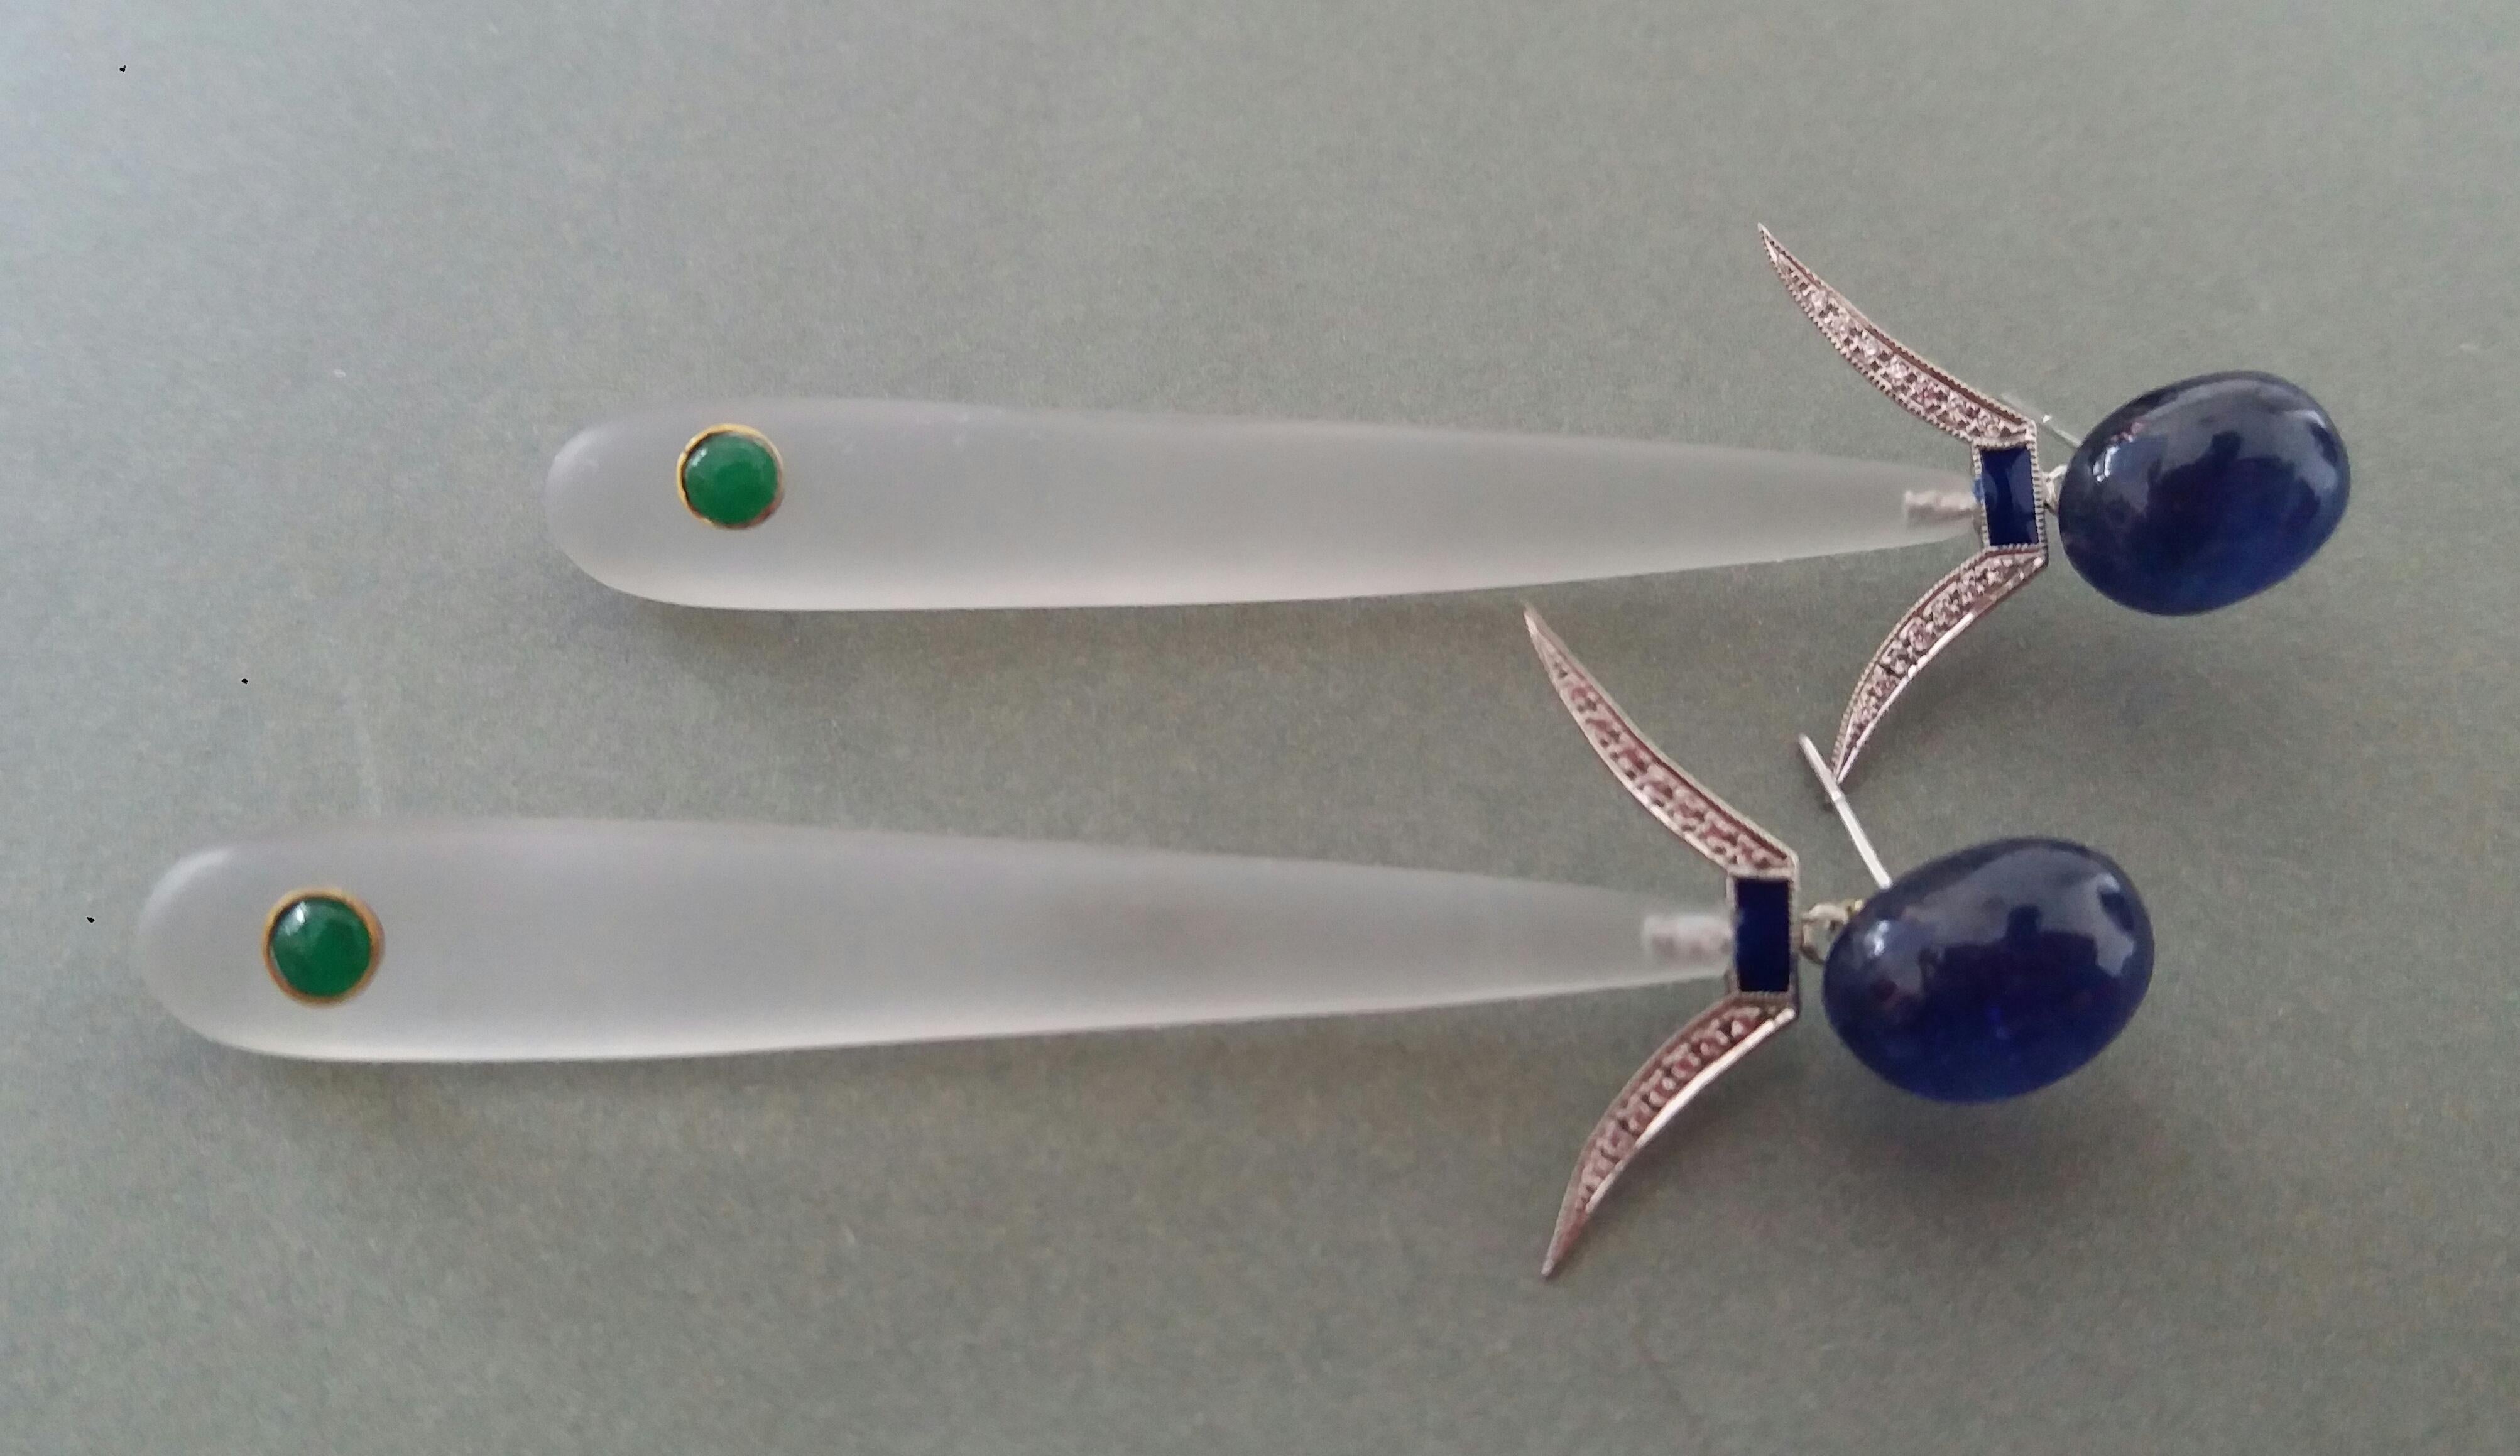 2 Oval Blue Sapphire cabs are on top, middle parts in white gold ,14 round full cut diamonds,blue enamel,2  Rock Crystal  plain drops 60 mm long with small Emerald round cabochons

In 1978 our workshop started in Italy to make simple-chic Art Deco